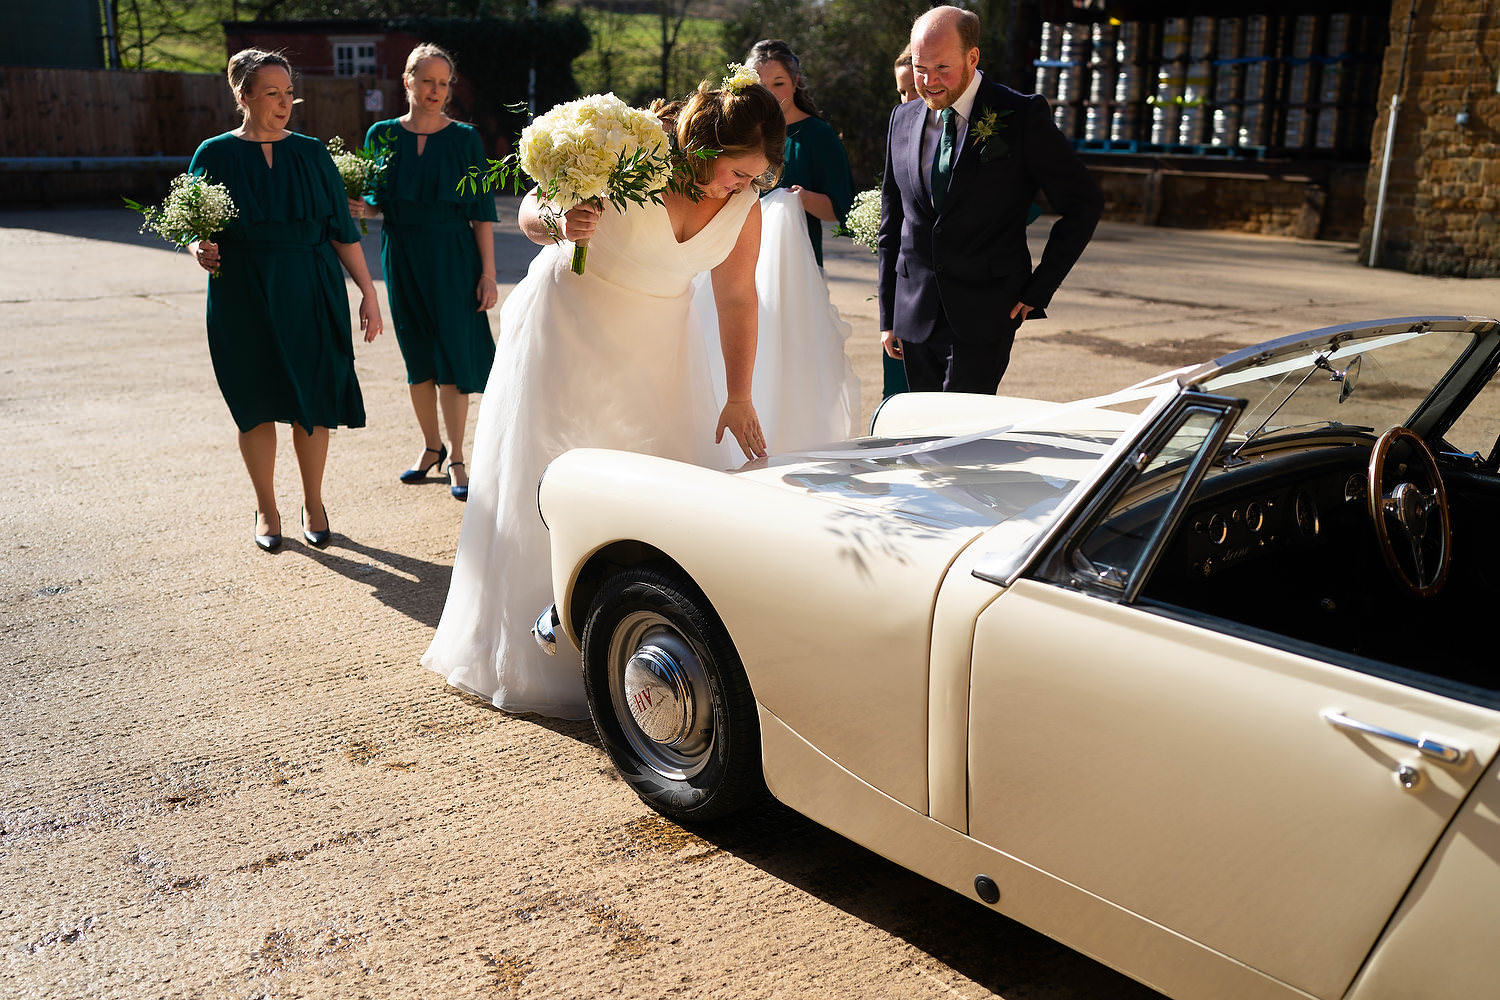 Bride touches her late father's car